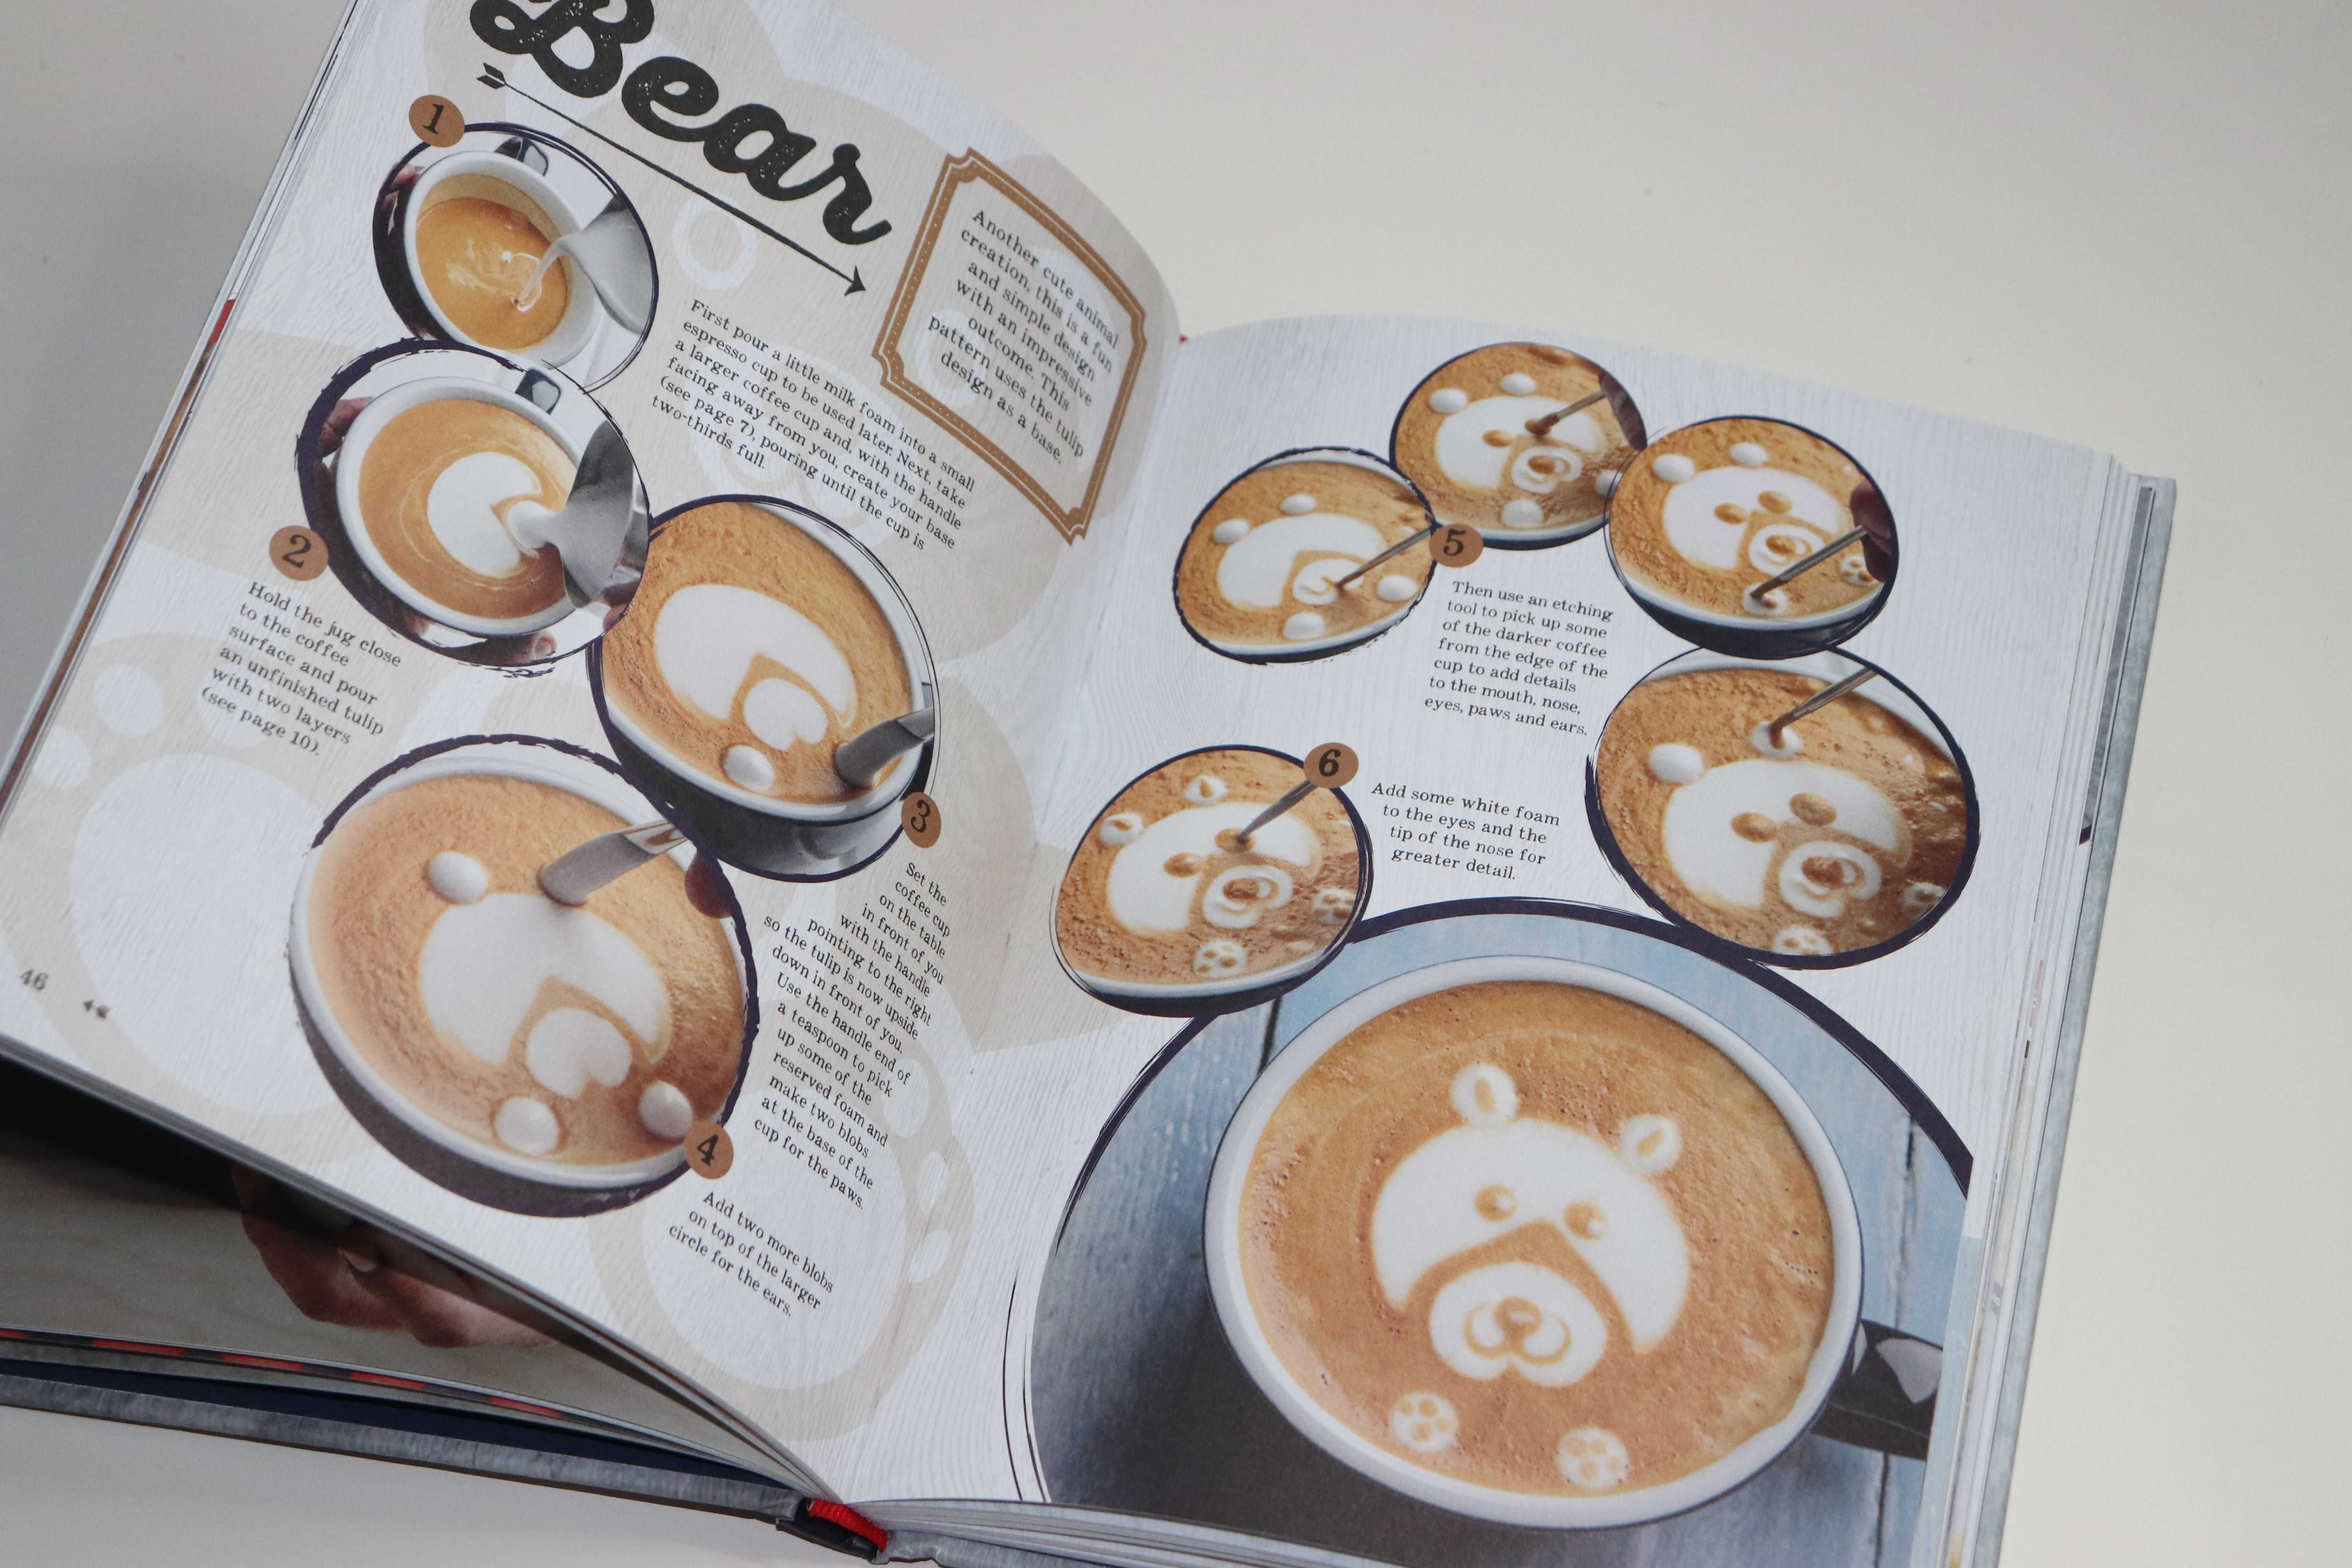 Coffee Art: Creative Coffee Designs For The Home Barista by Tamang